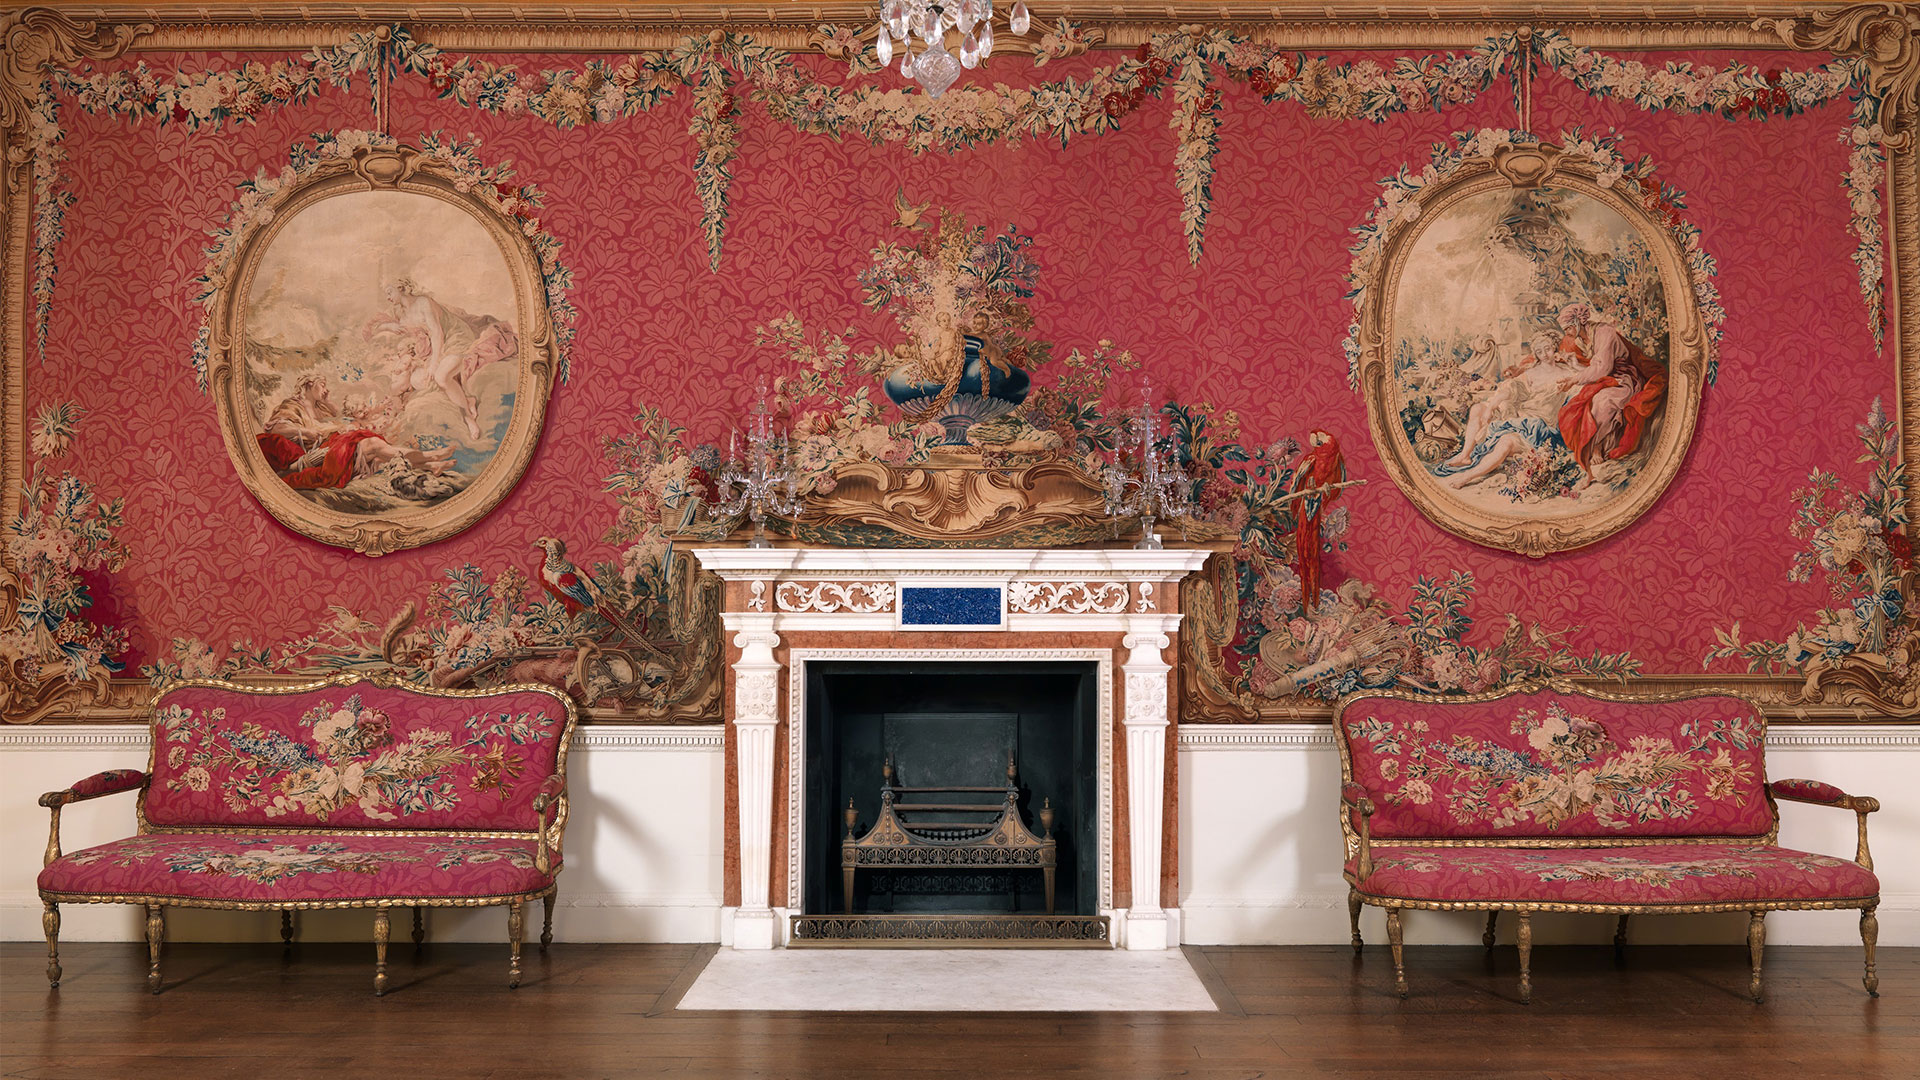 Photograph of the Tapestry Room at Croome Court showing tapestries after François Boucher.